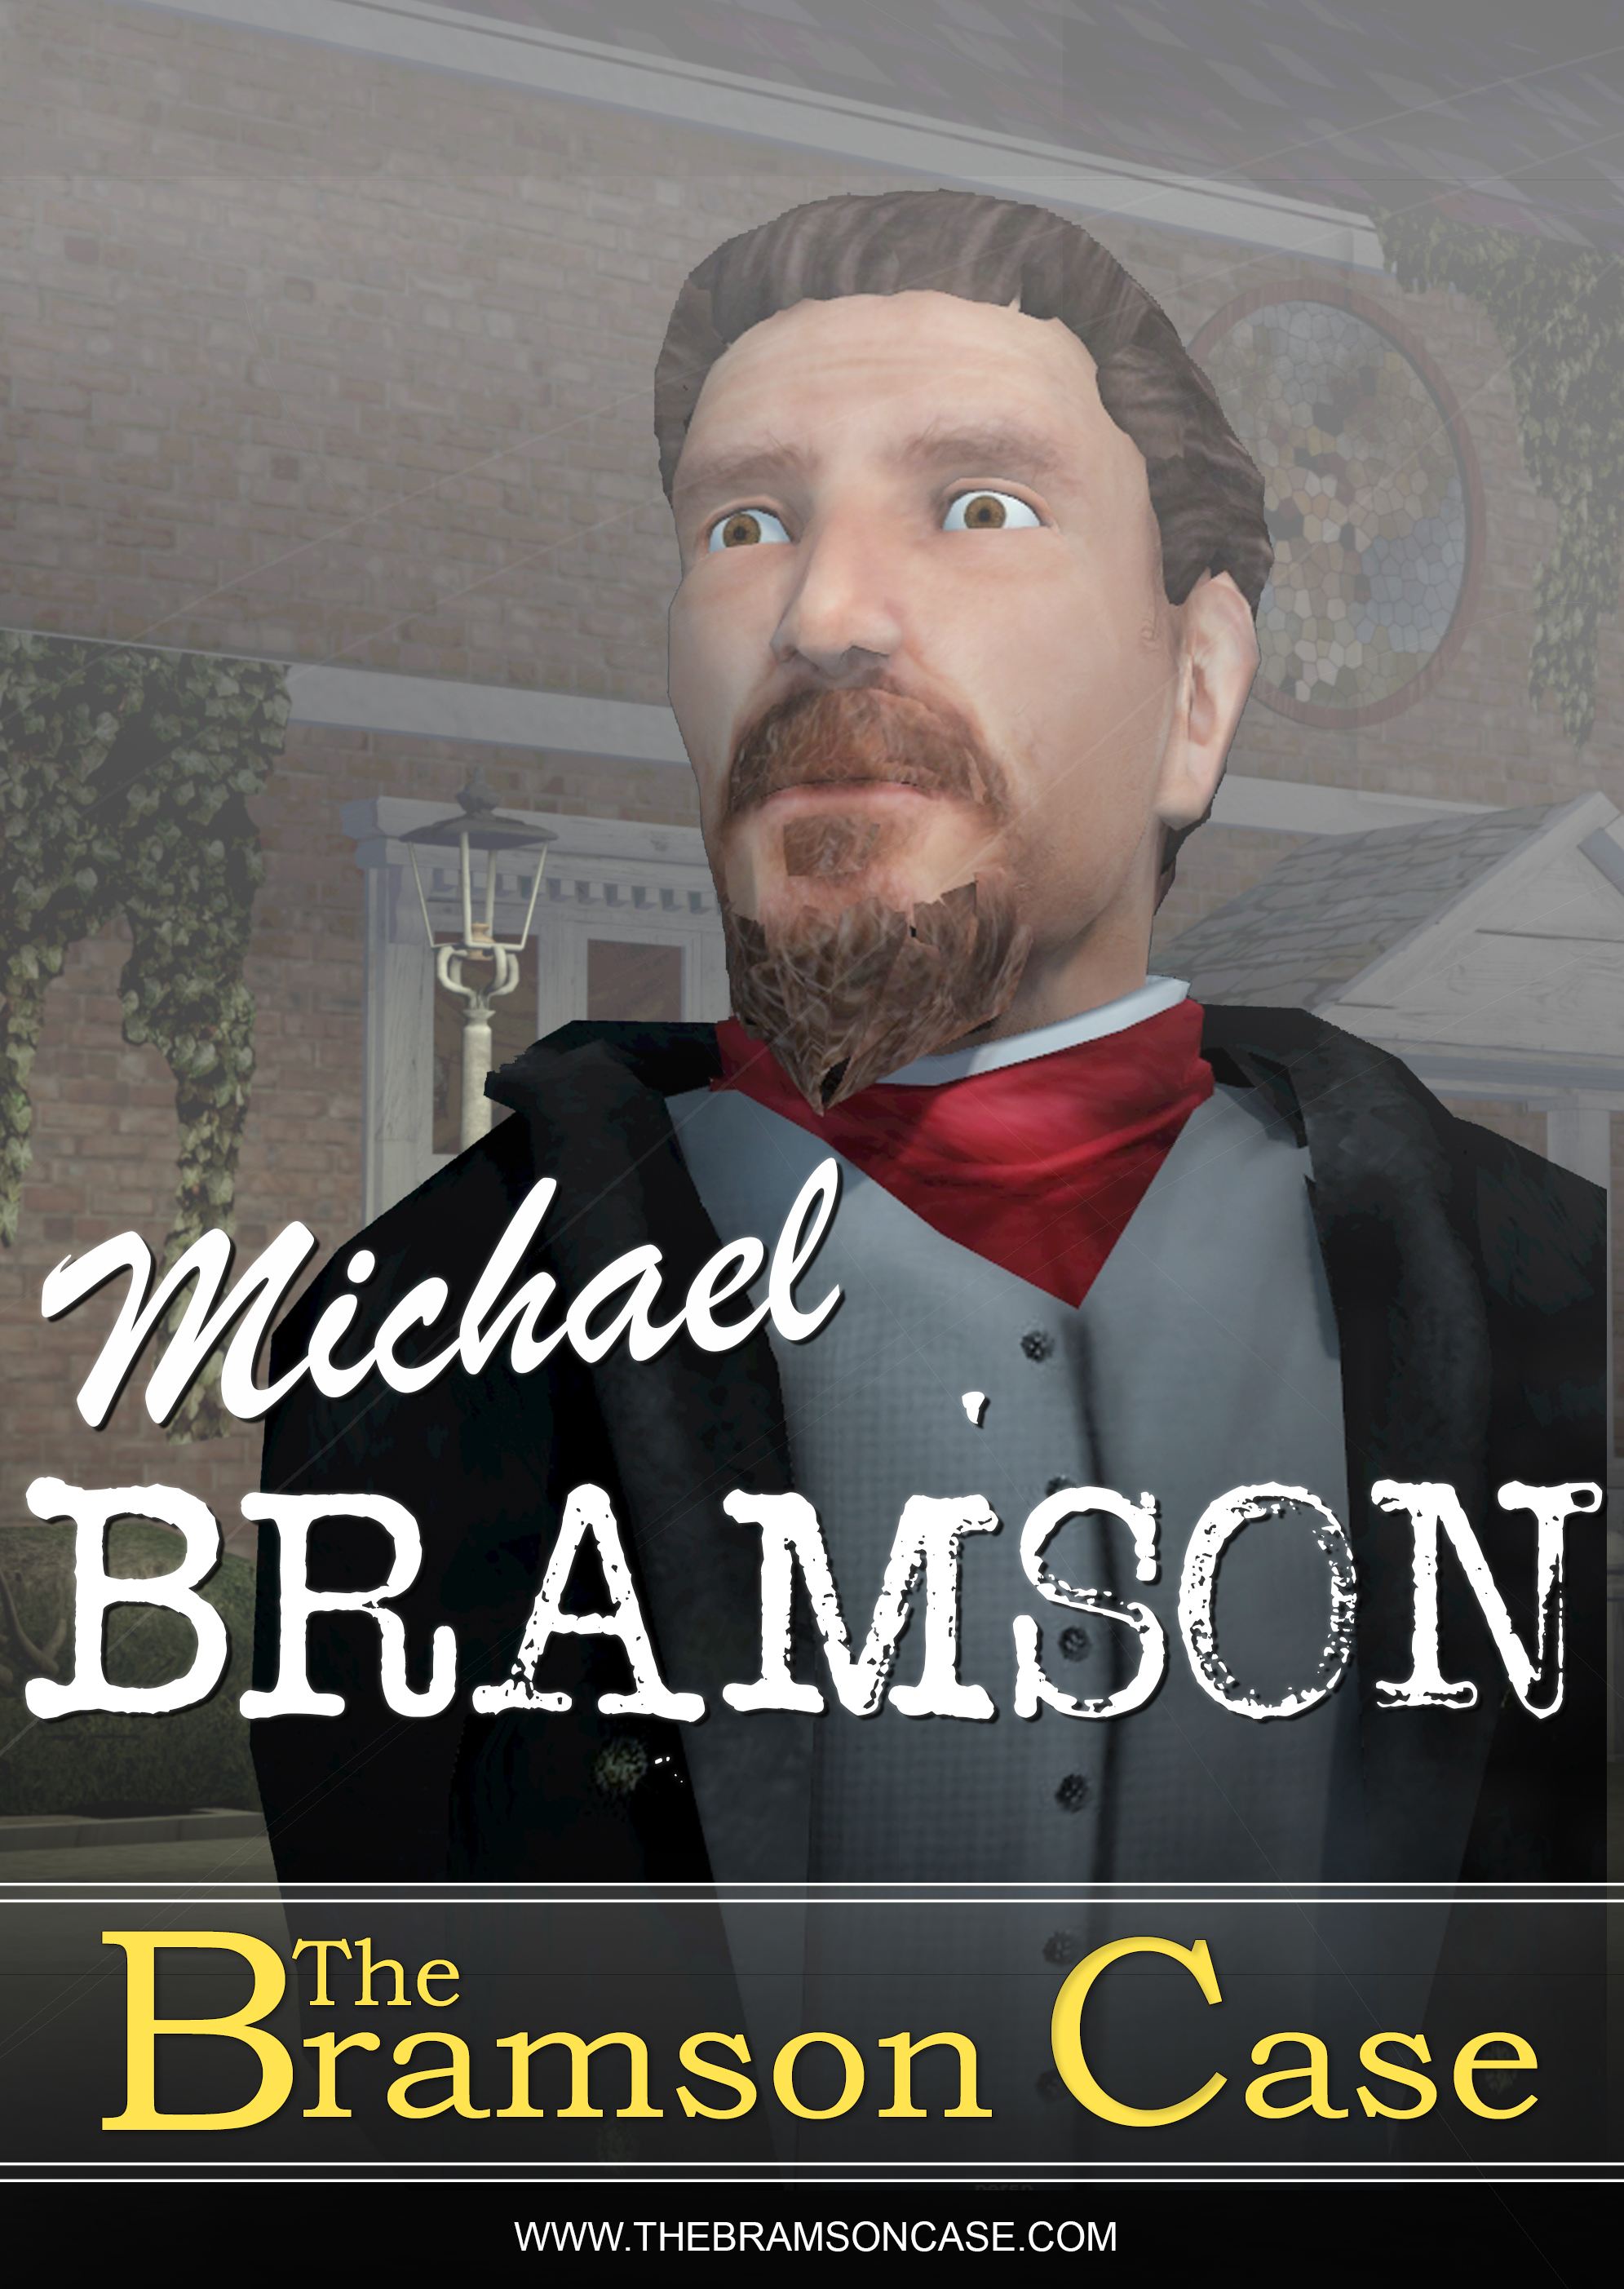 the bramson case, characters, cthulhu,lovecraft, michael bramson